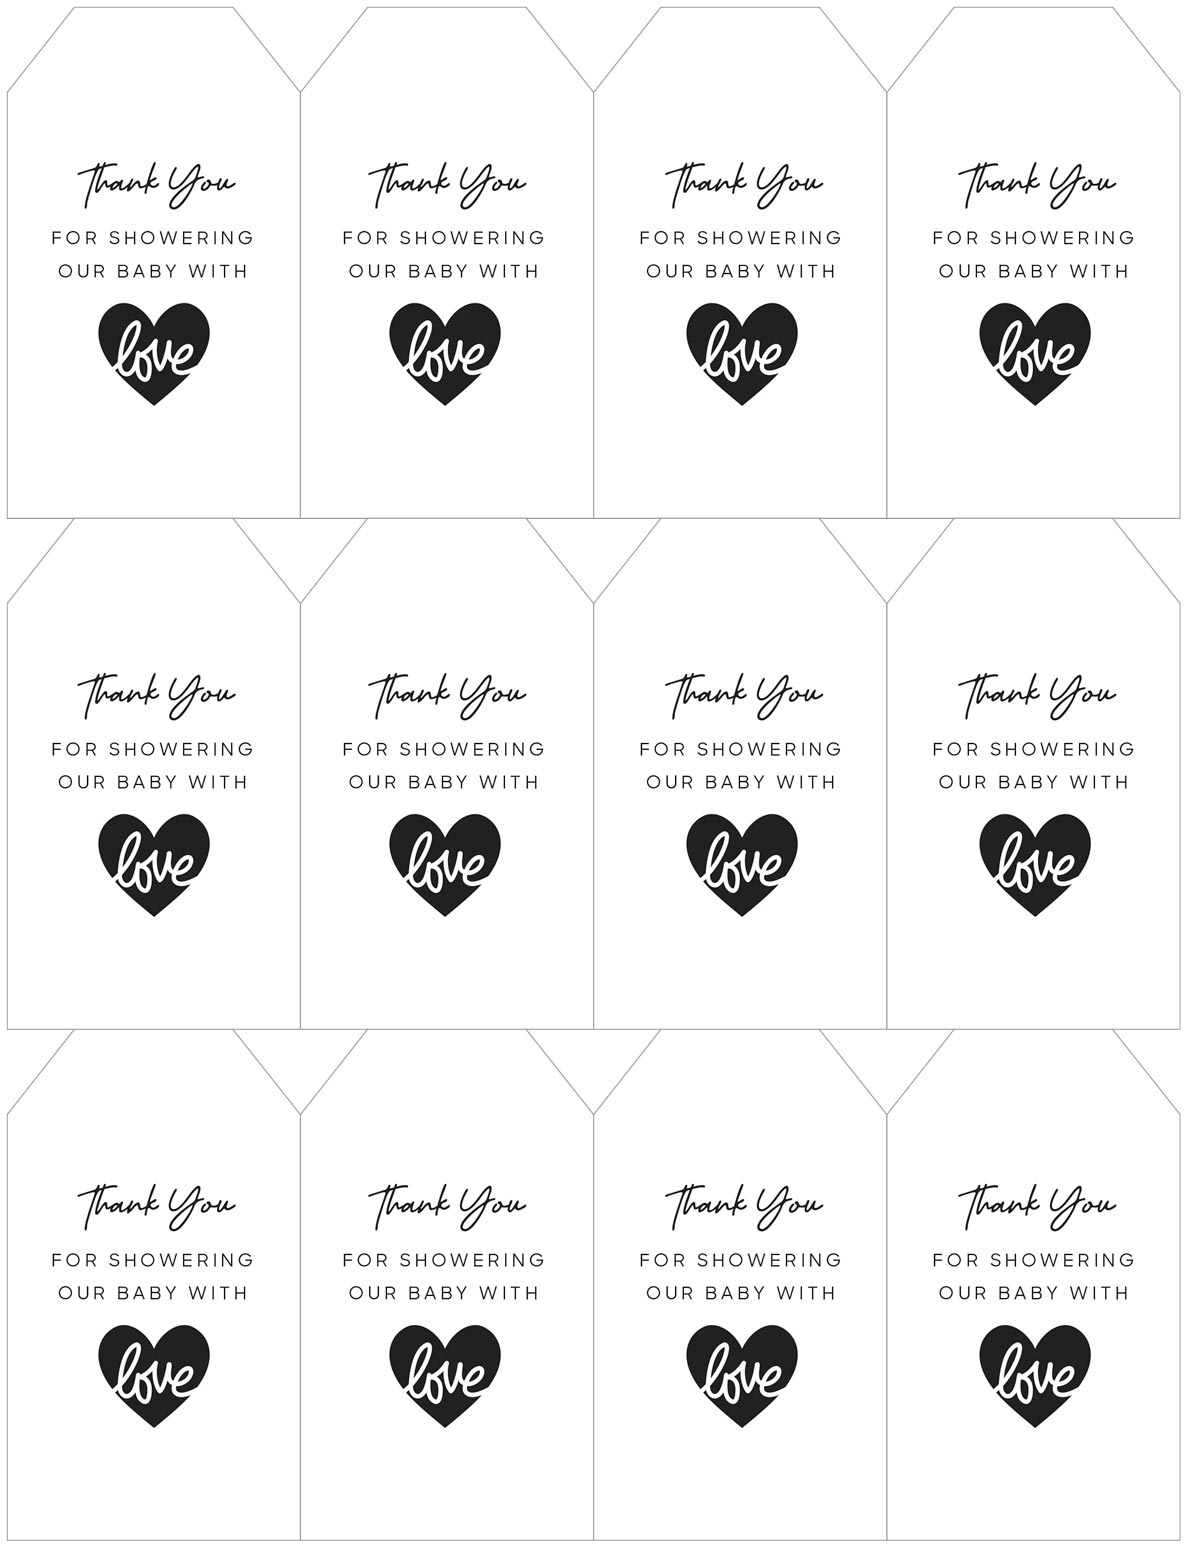 Charming Baby Shower Favor Tags Free Printable For Your Thank You Gifts Skip To My Lou - Free Printable Baby Shower Gift Tags